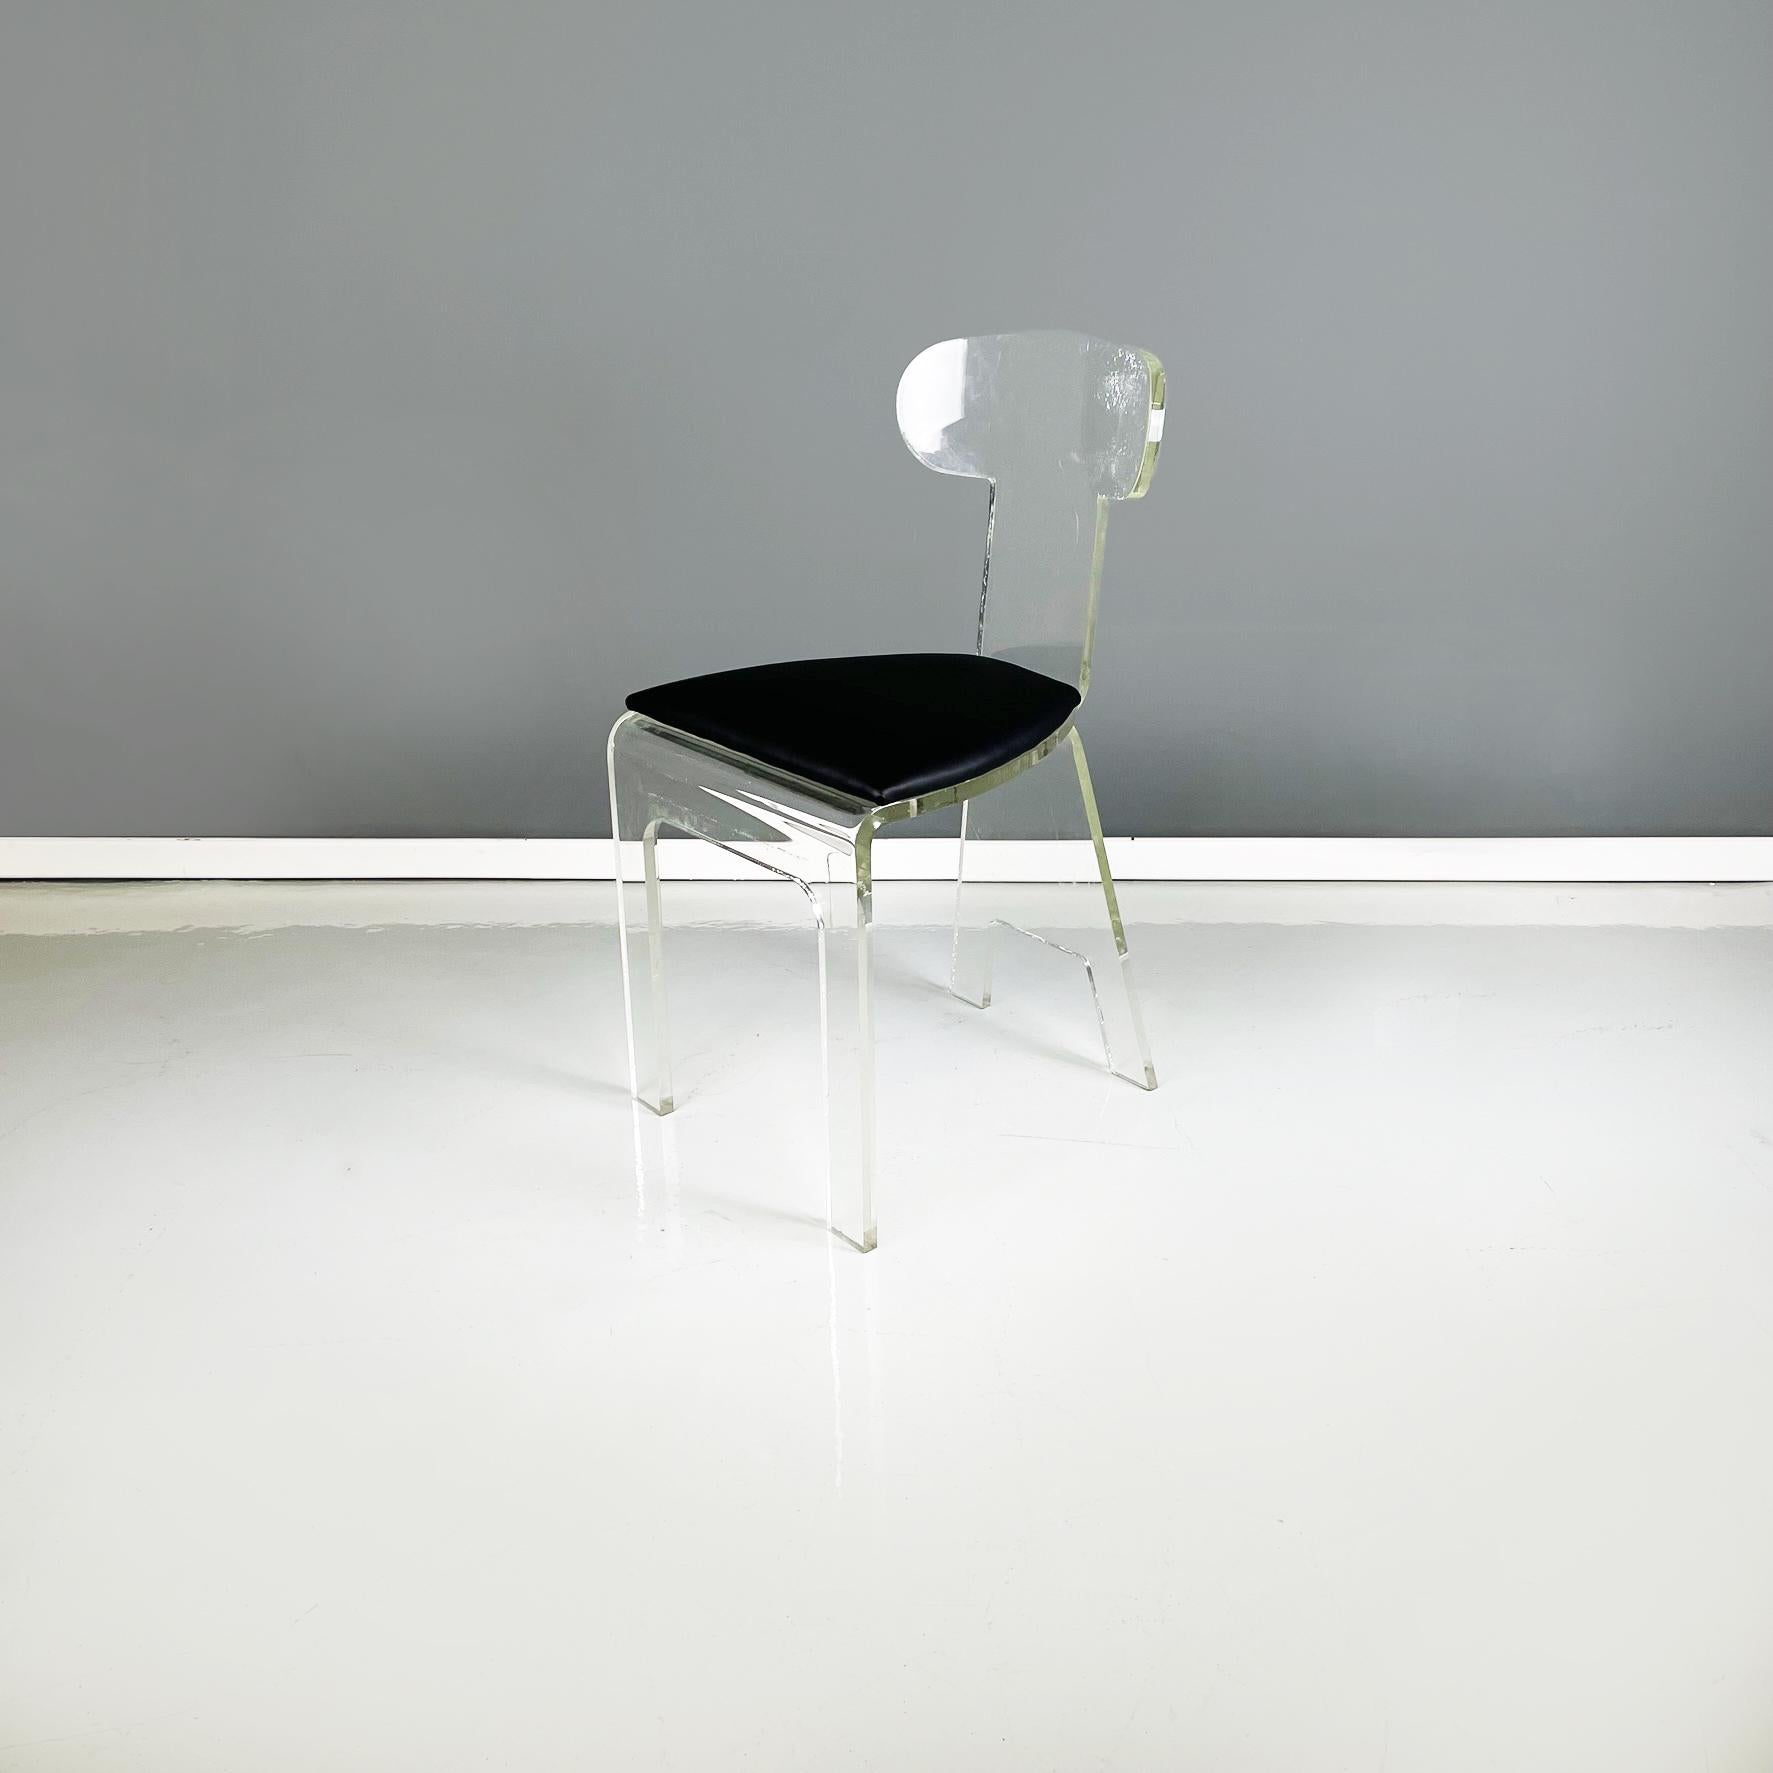 Italian modern Chairs in transparent thick plexiglass and black sky, 1980s
Set of three chairs with transparent plexiglass structure. The curved backrest and legs are made of thick plexiglass plates. The semi-oval seat is padded and covered in black